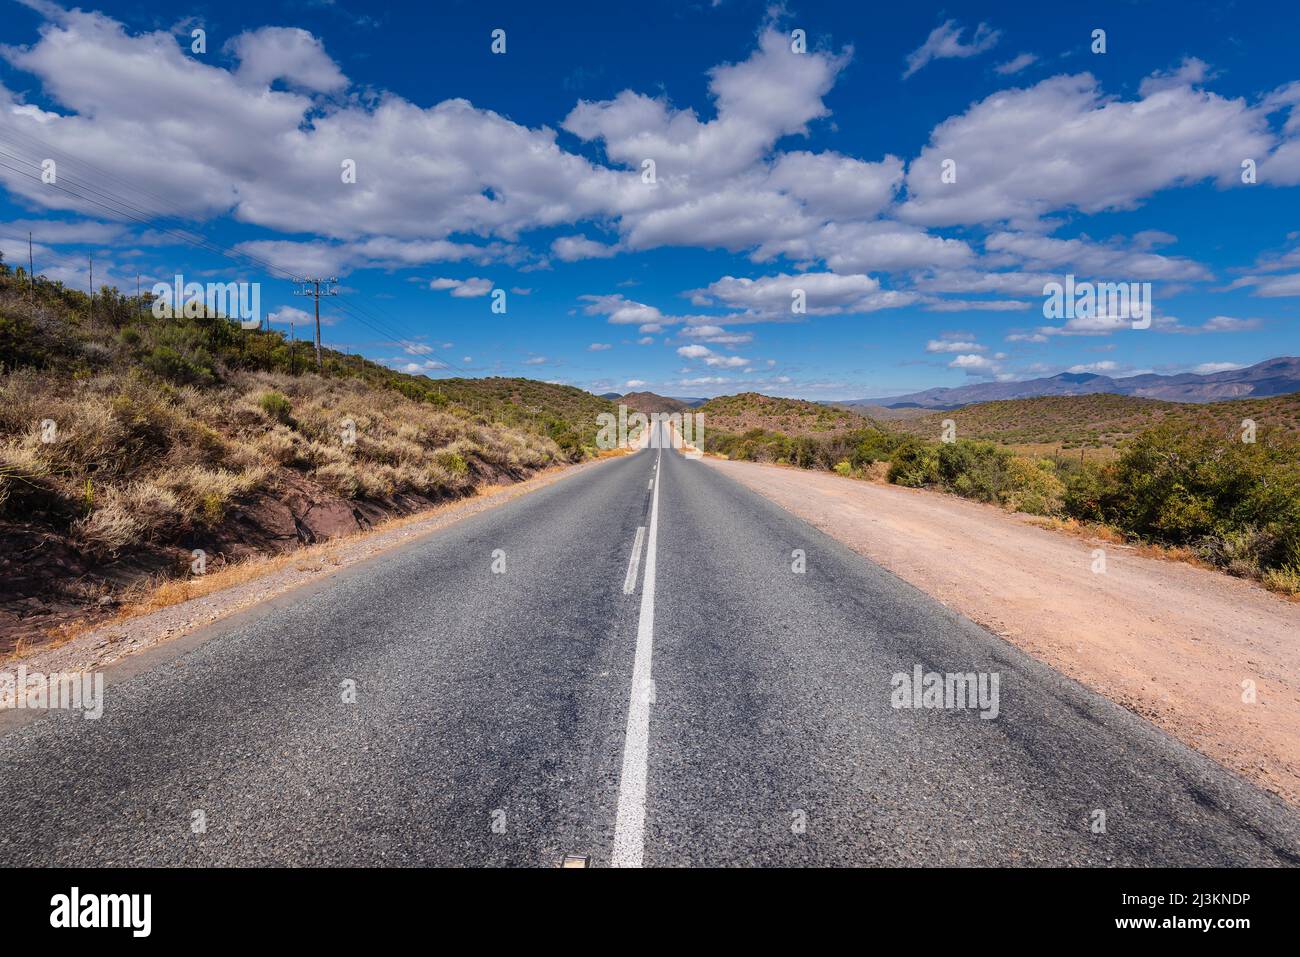 Straight paved two-lane road leading into the distance, Route 62 in South Africa; South Africa Stock Photo